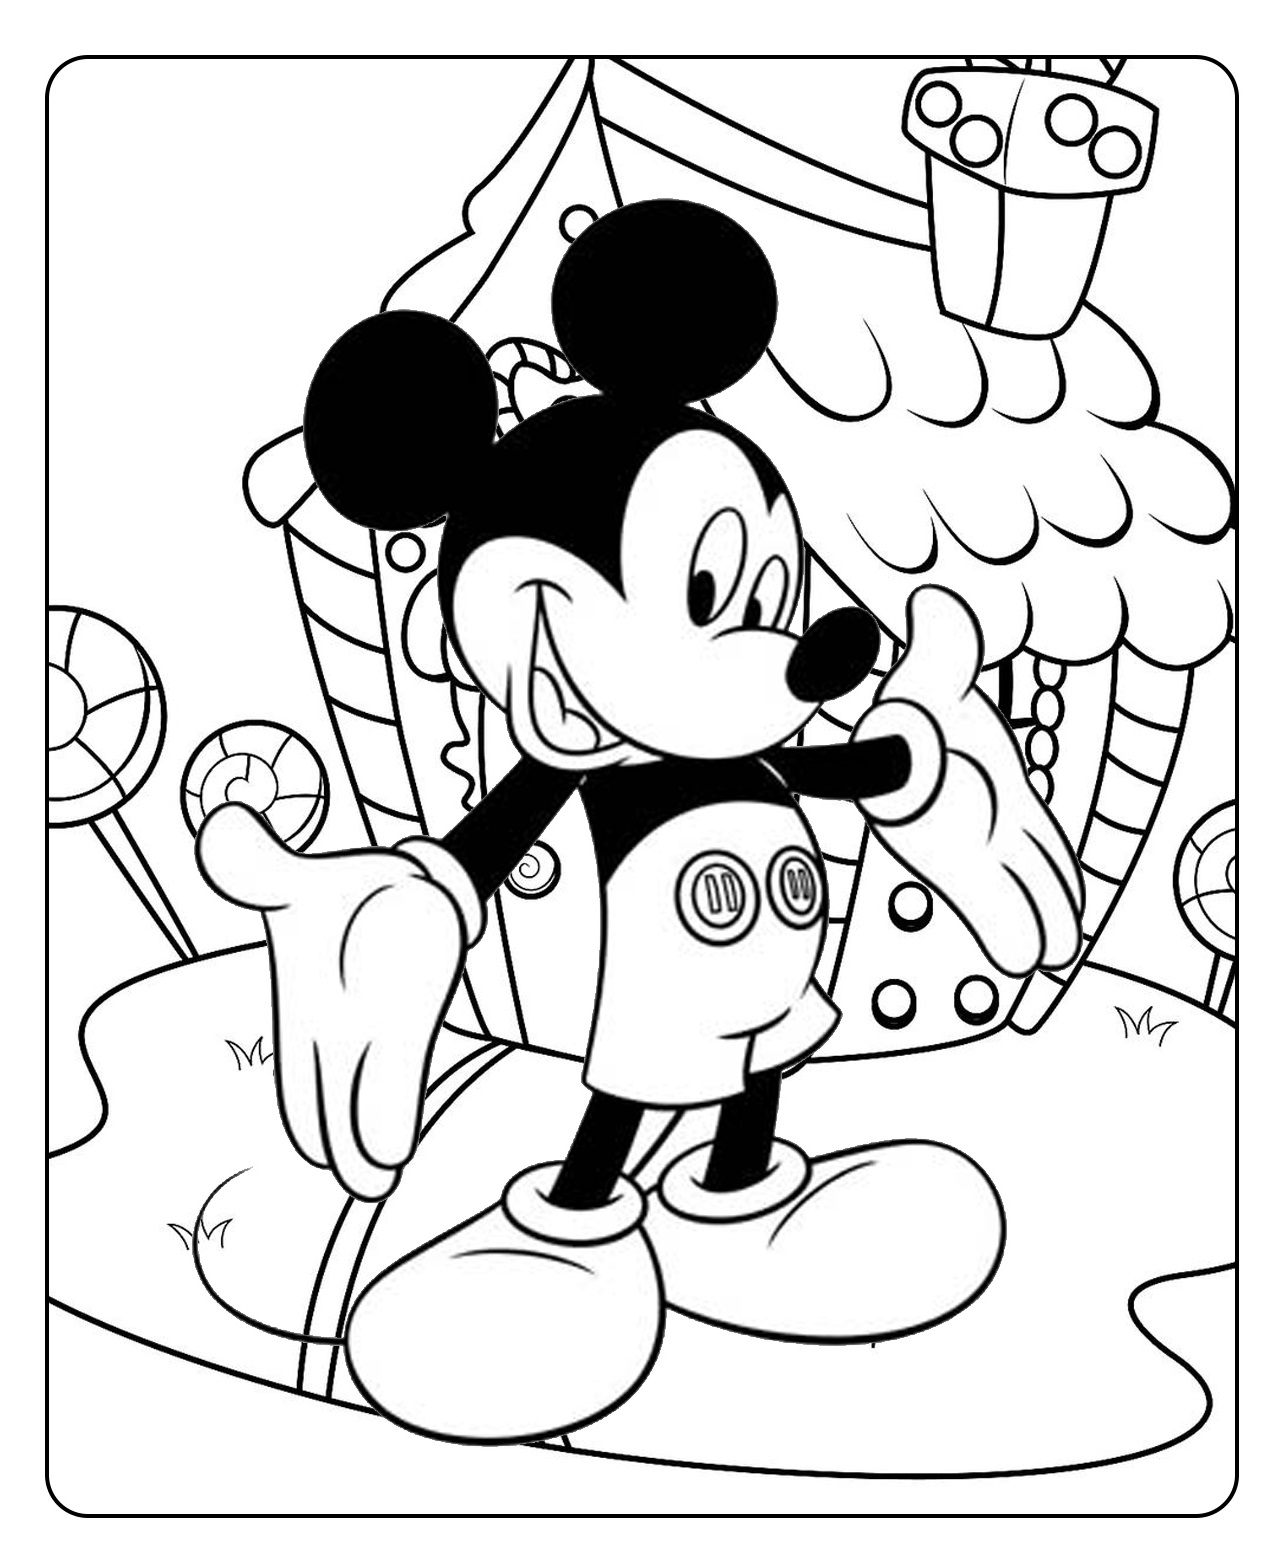 Mickey Mouse Clubhouse Coloring Pages For Kids - Printable Mickey Mouse Clubhouse Coloring Pages